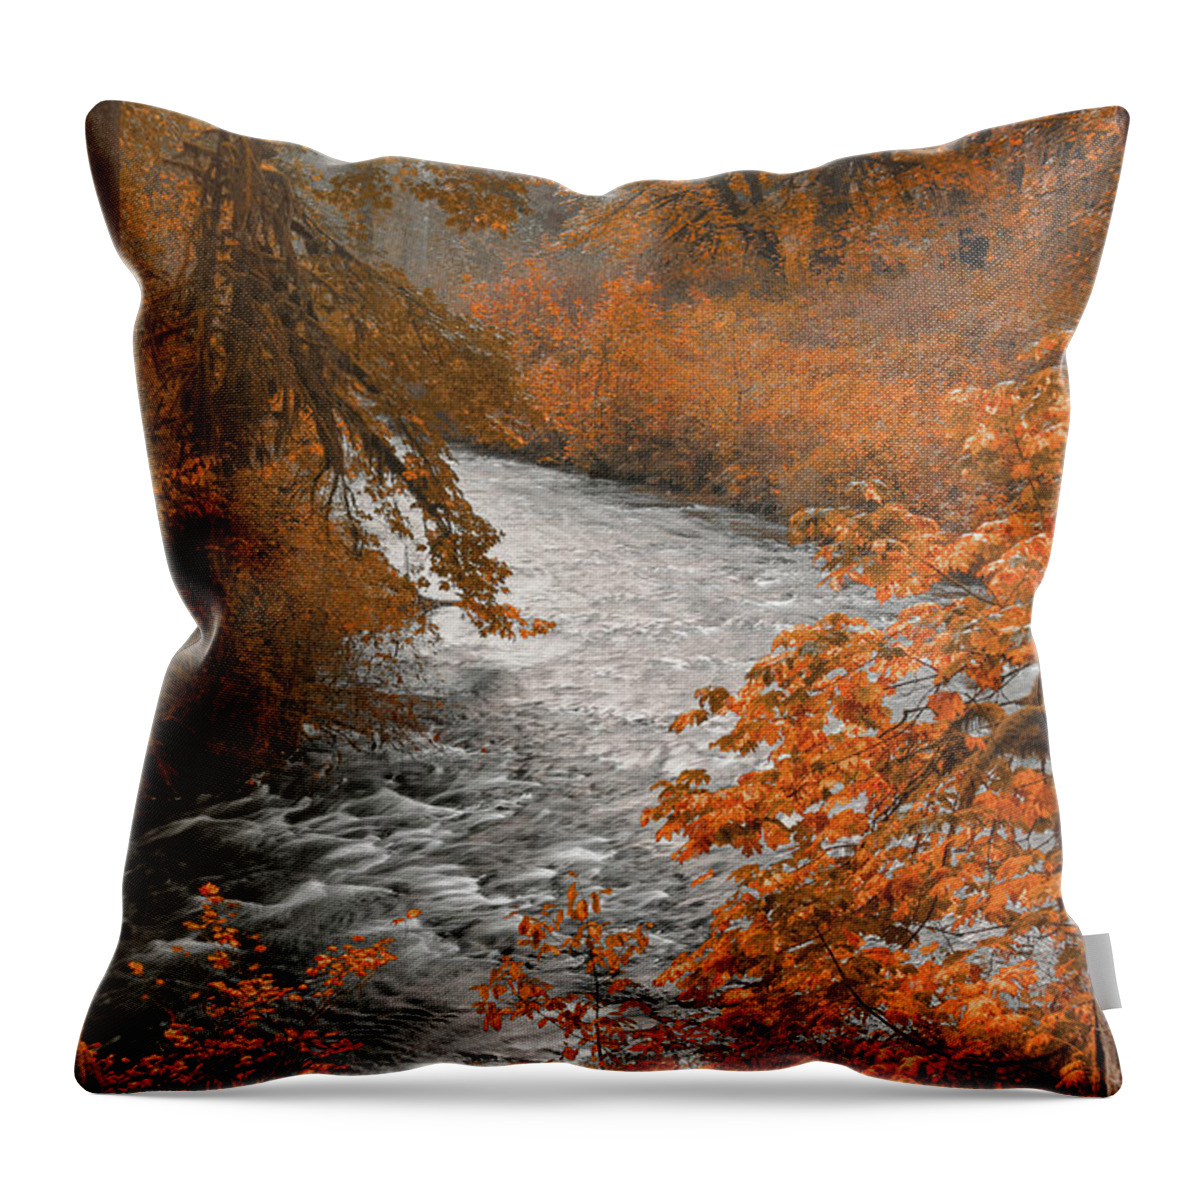 Water Throw Pillow featuring the photograph Silver Creek by Don Schwartz